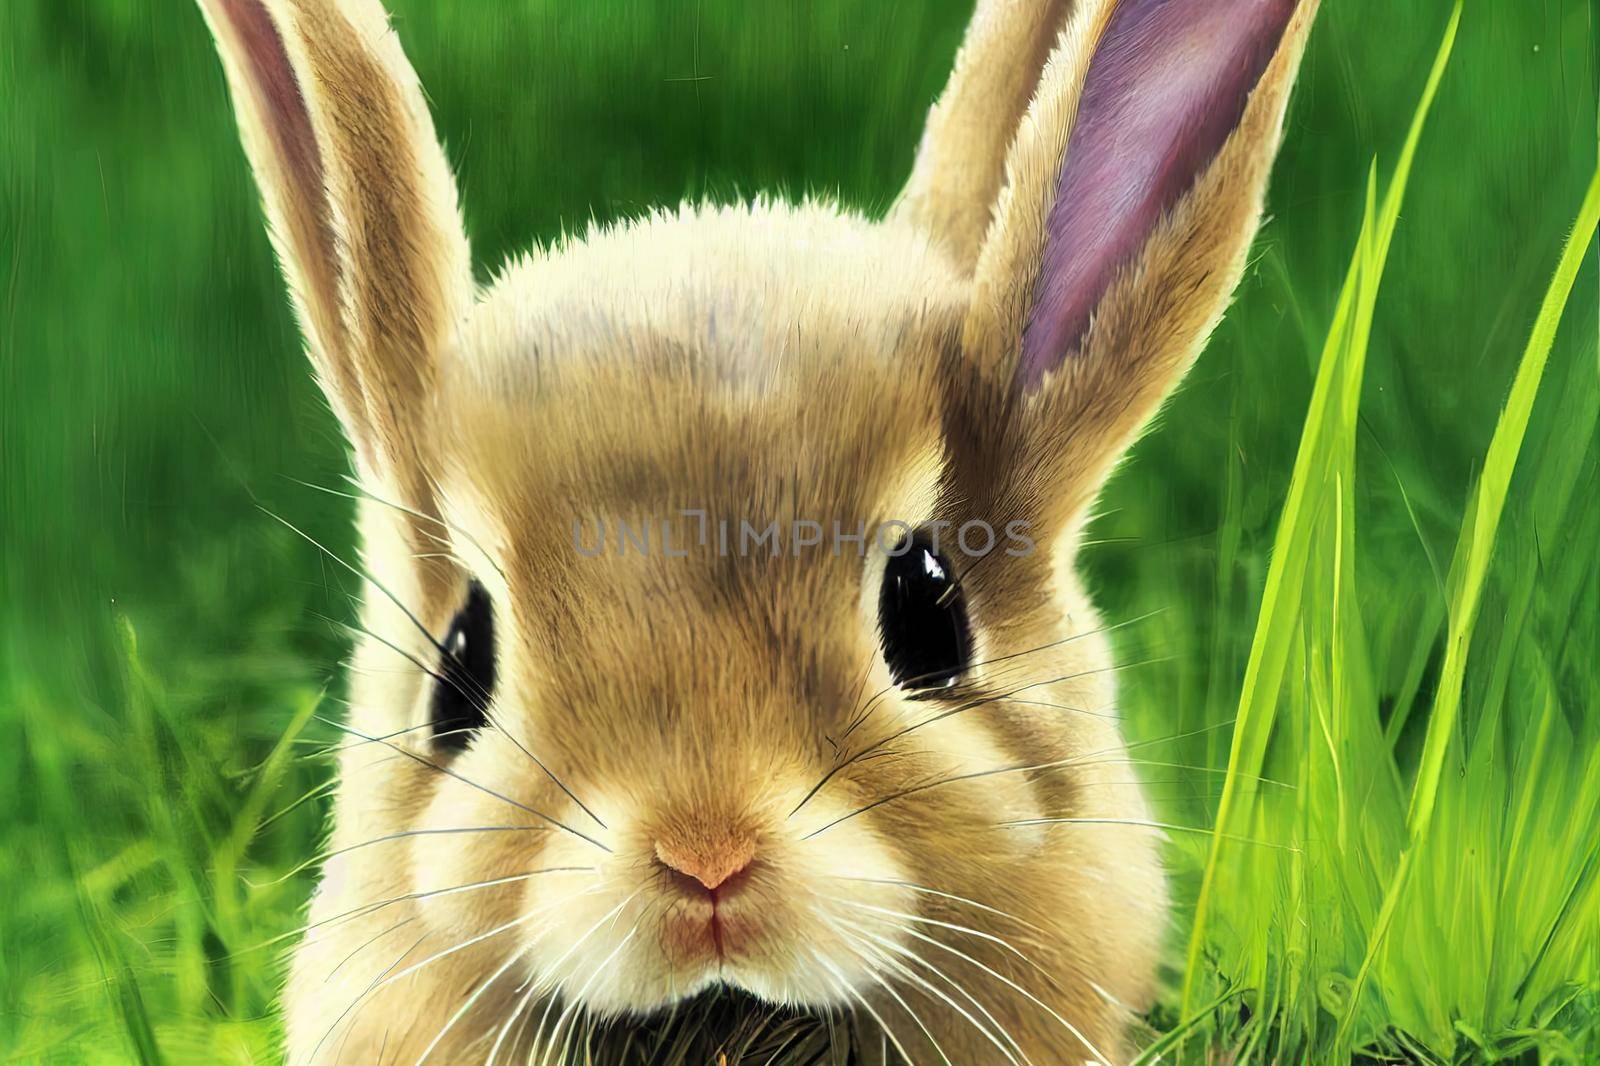 Close up image of a baby rabbit eating grass. The rabbit has big ears and long whiskers.